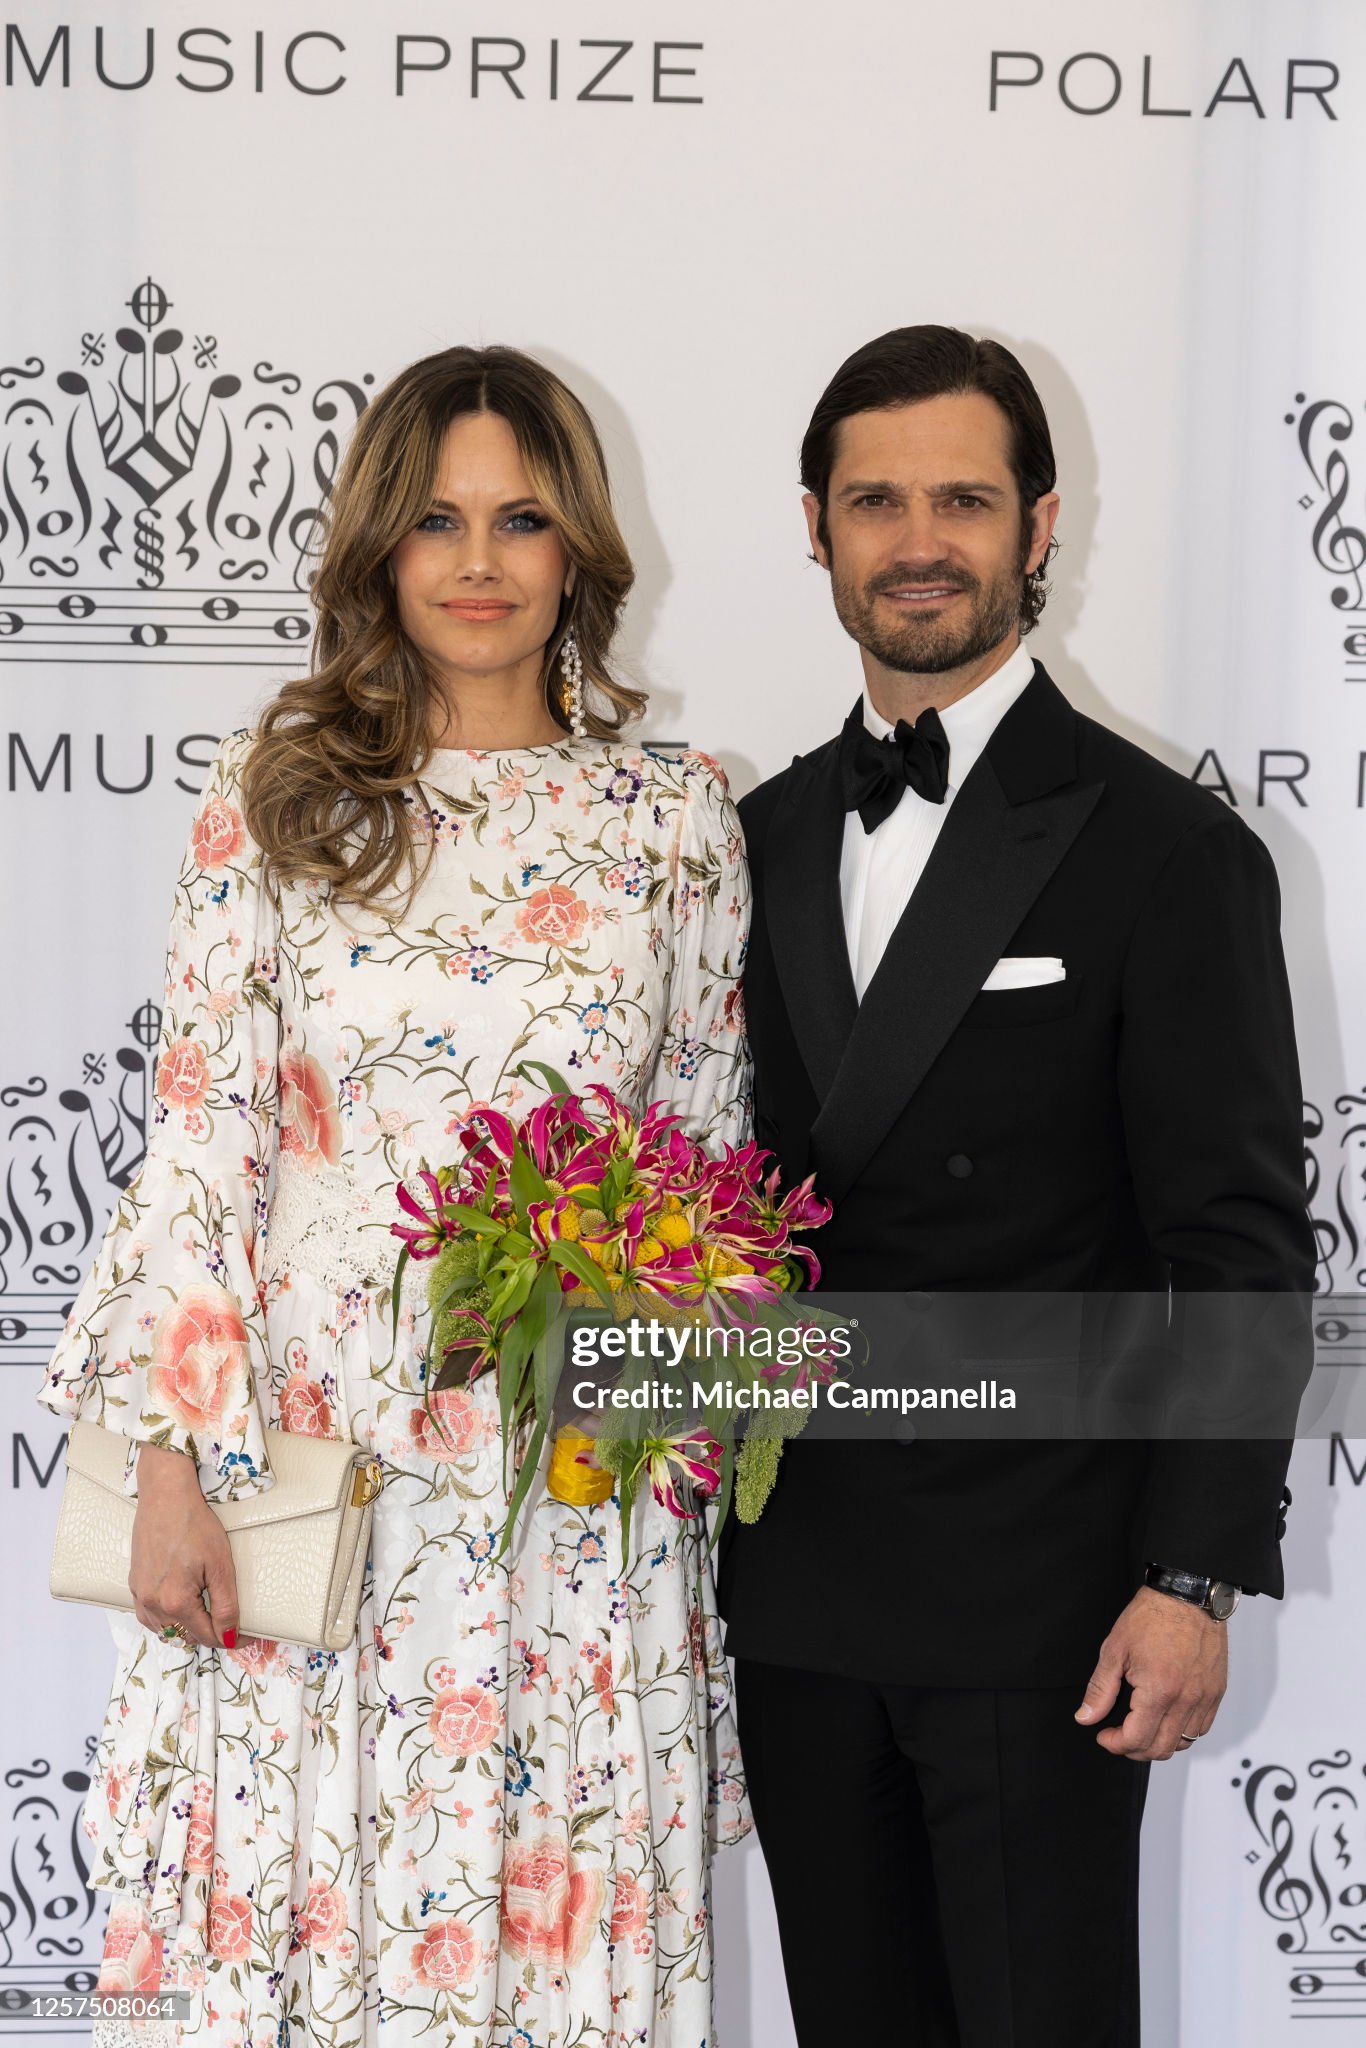 princess-sofia-and-prince-carl-philip-of-sweden-attend-the-polar-music-prize-2023-on-may-23.jpg